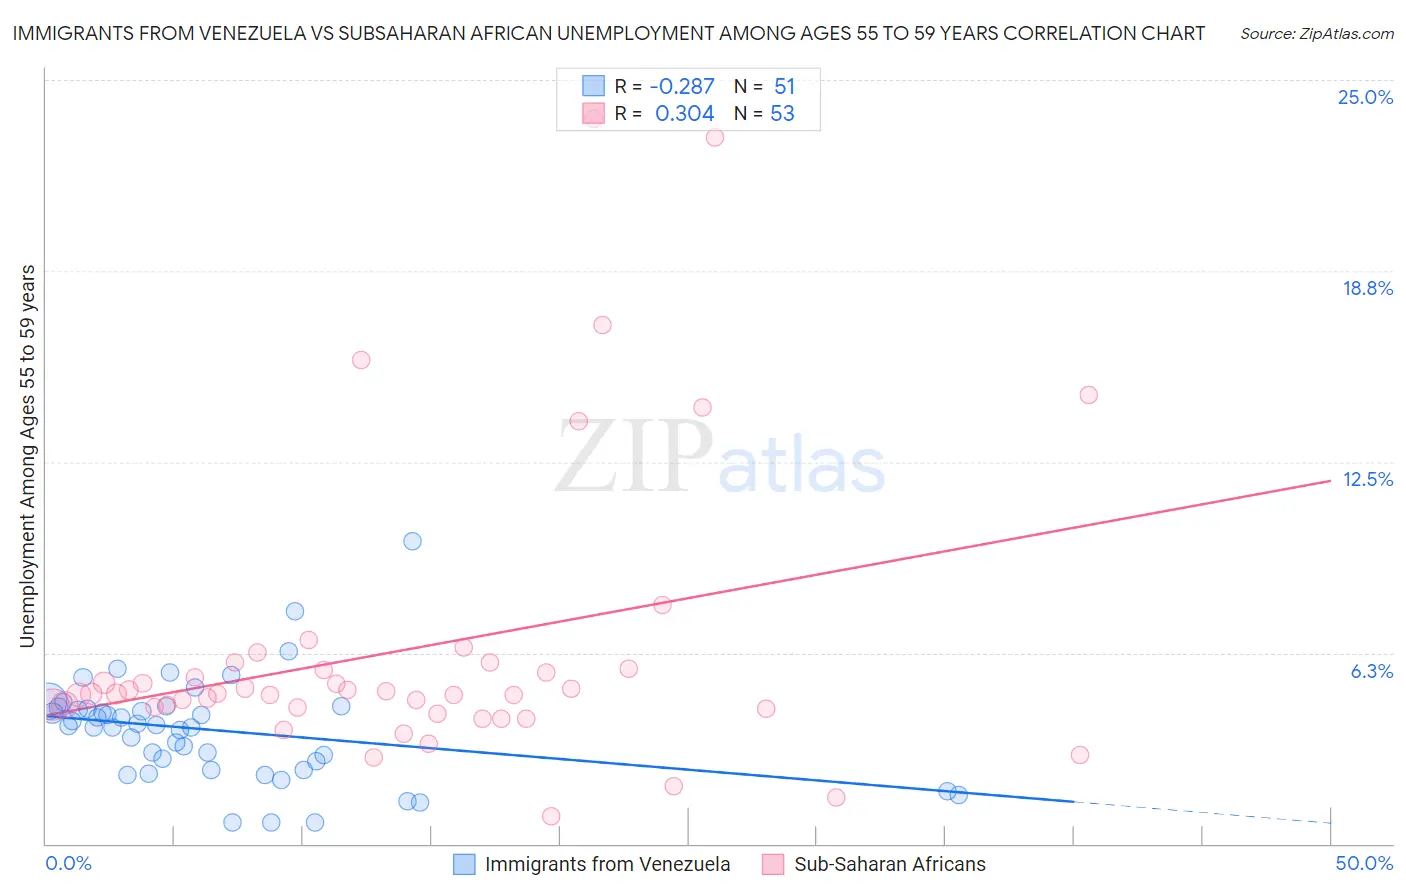 Immigrants from Venezuela vs Subsaharan African Unemployment Among Ages 55 to 59 years